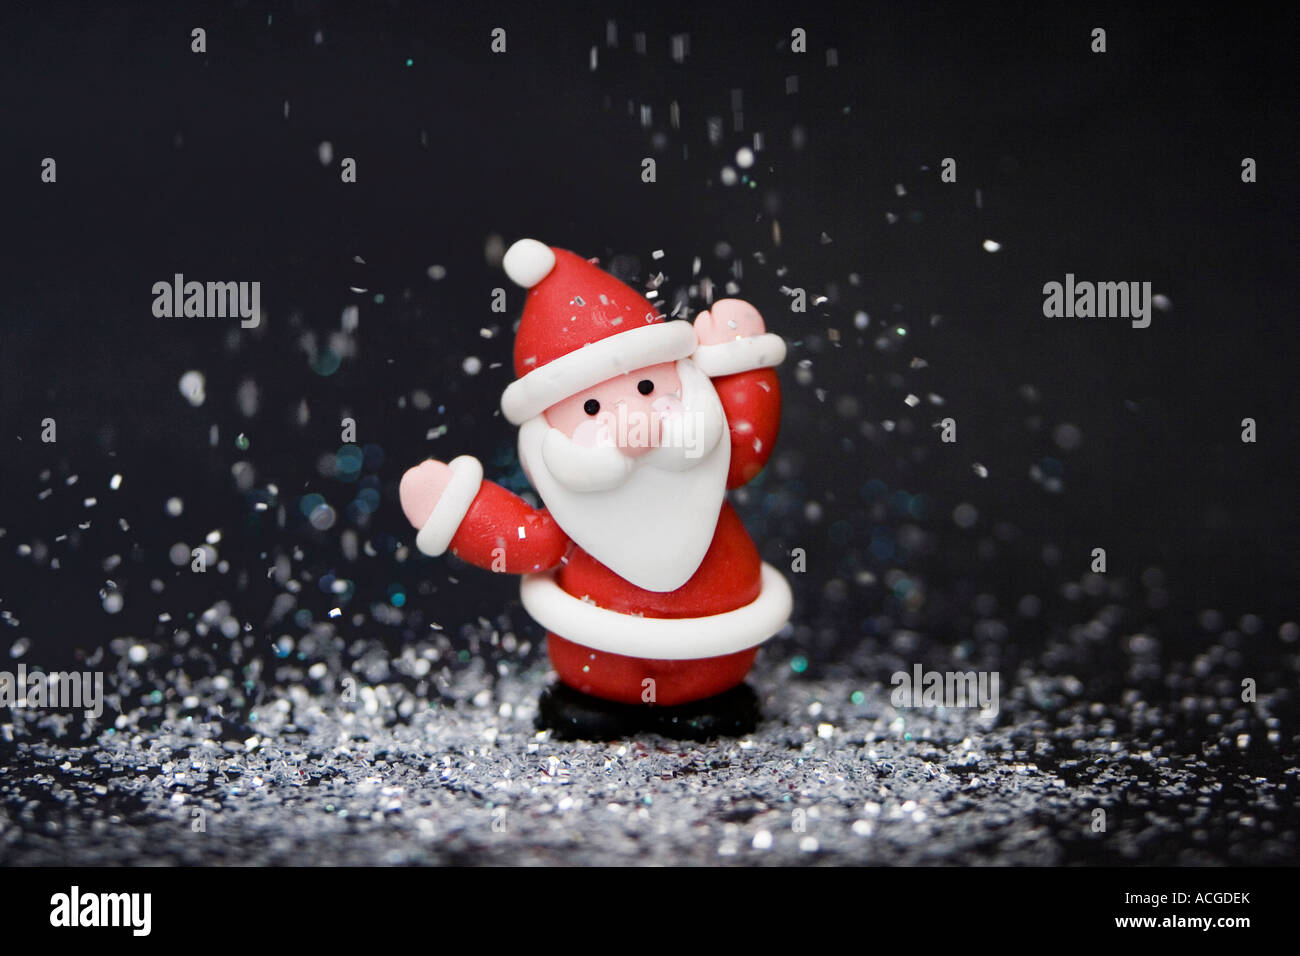 Father Christmas decoration against black surrounded by glitter Stock Photo